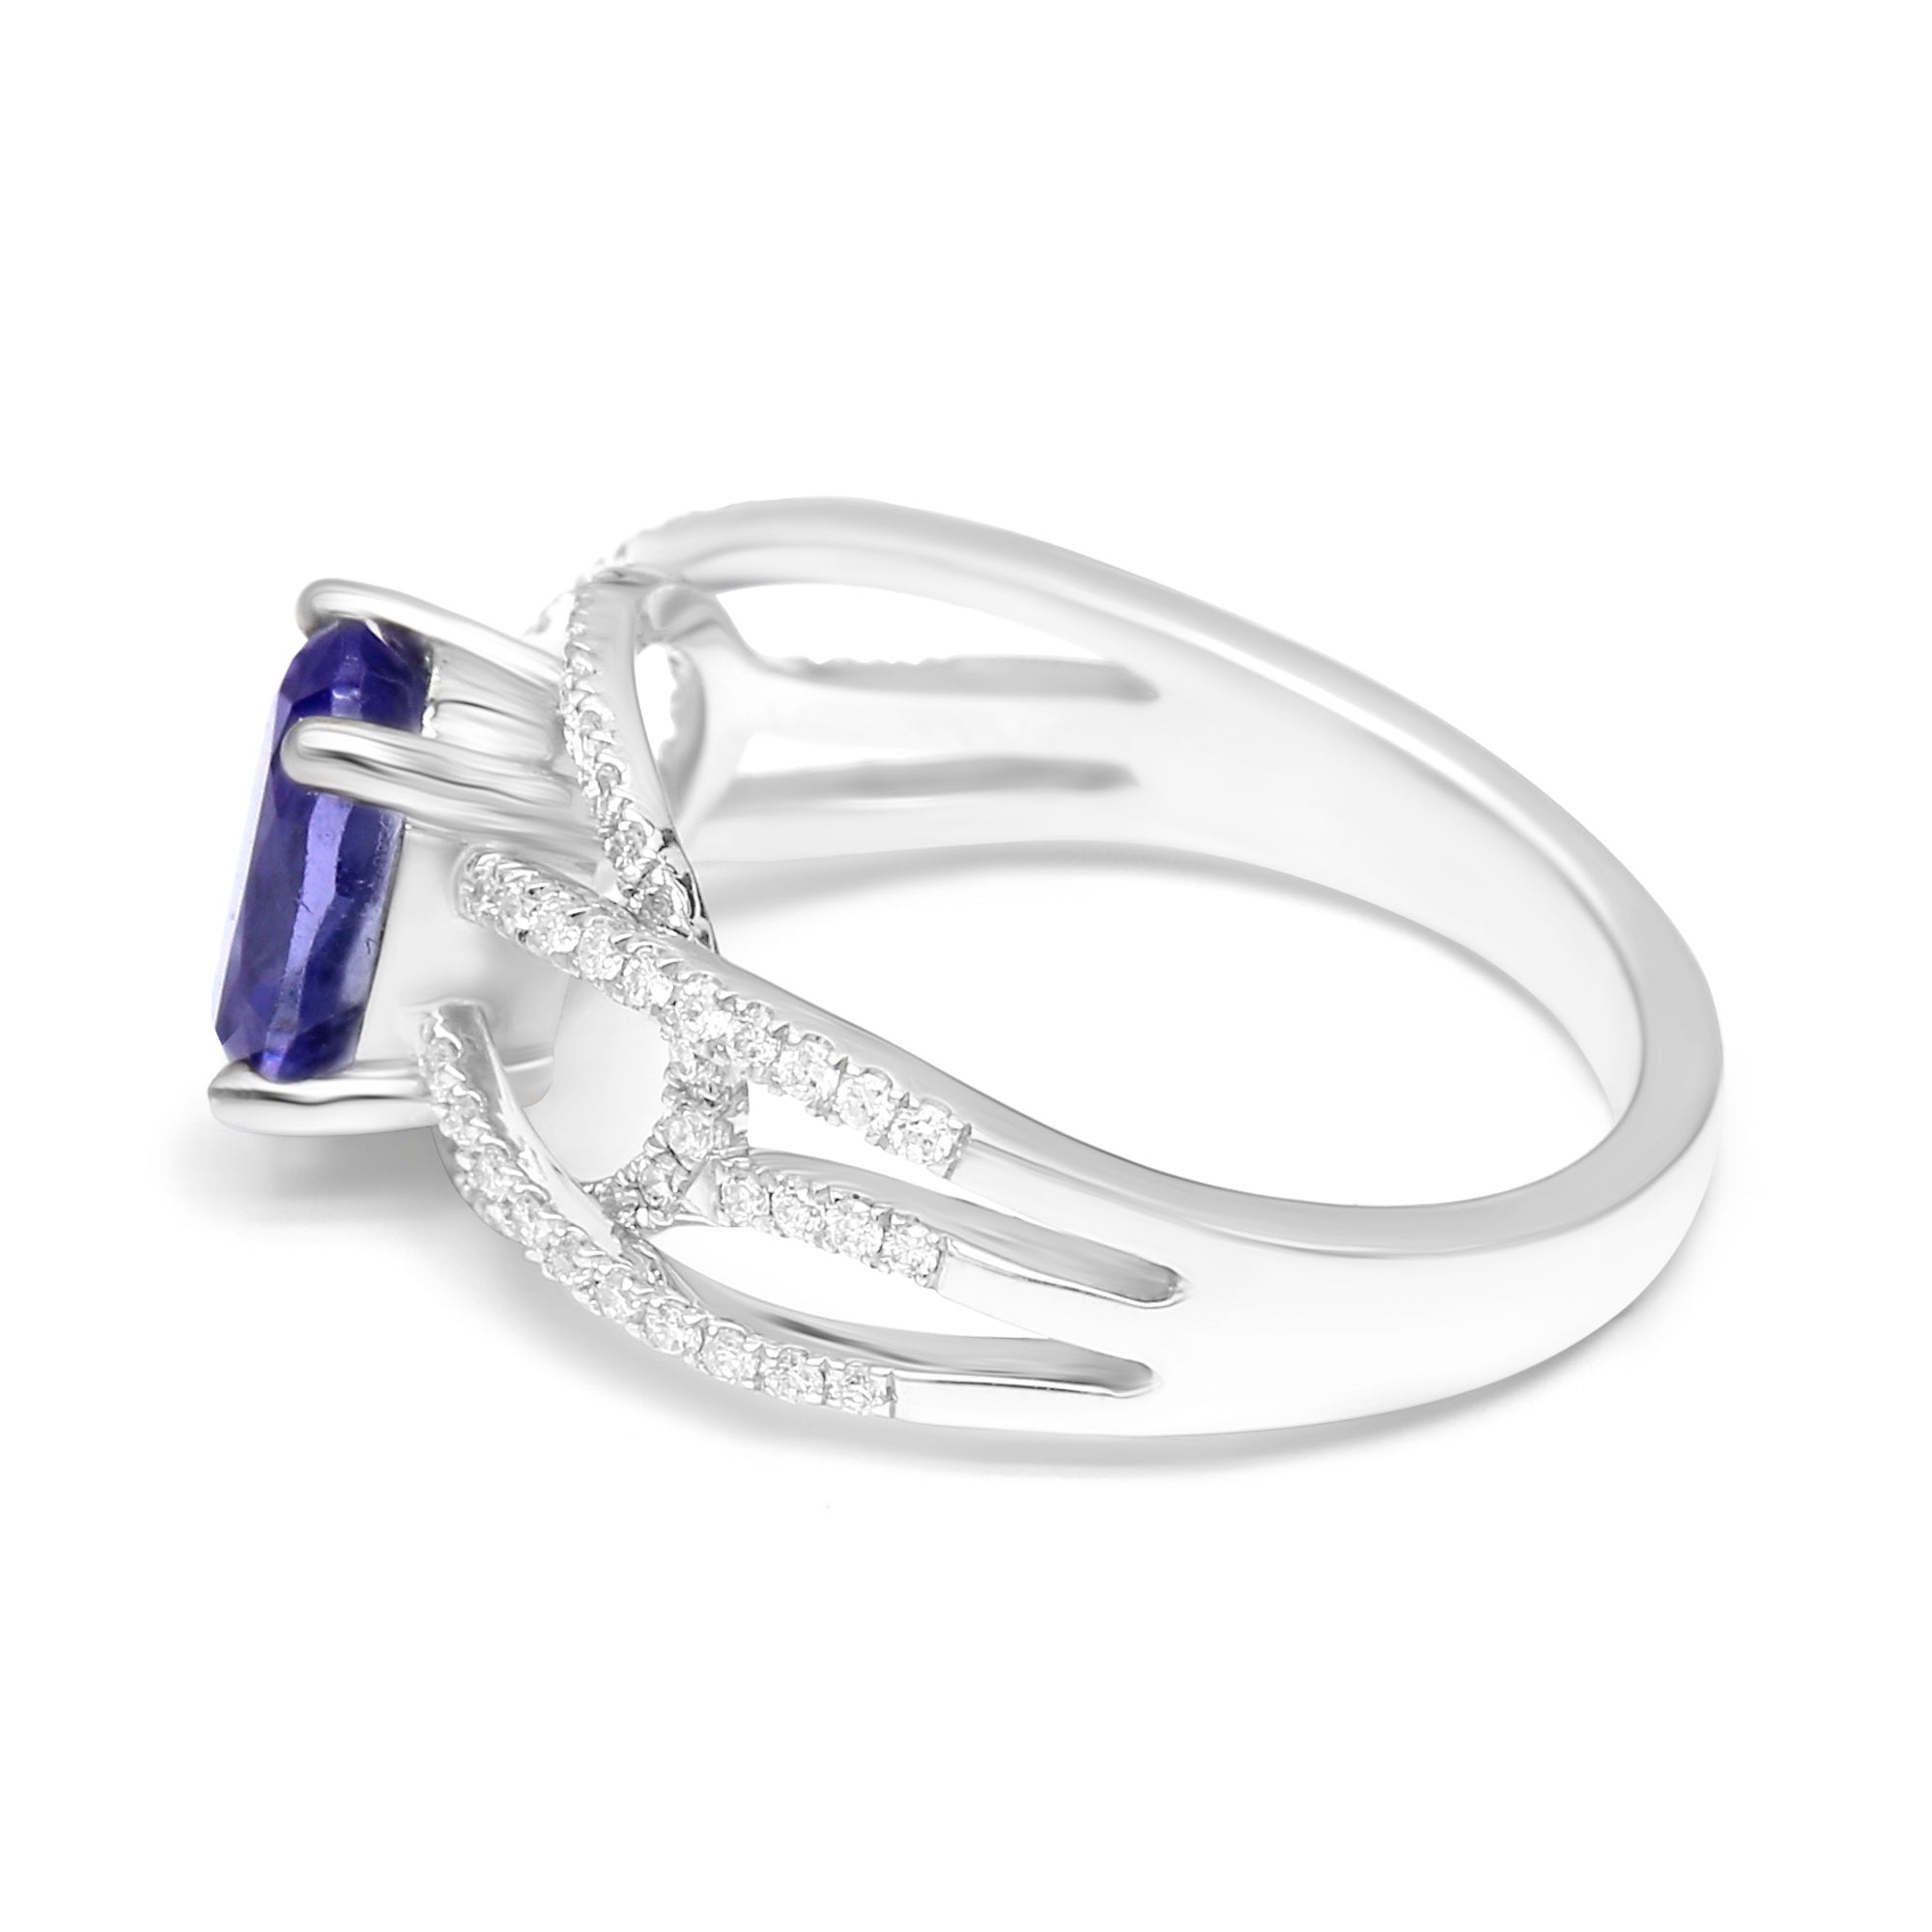 Tanzanite Oval Ring with Diamonds - 1.83ct TW